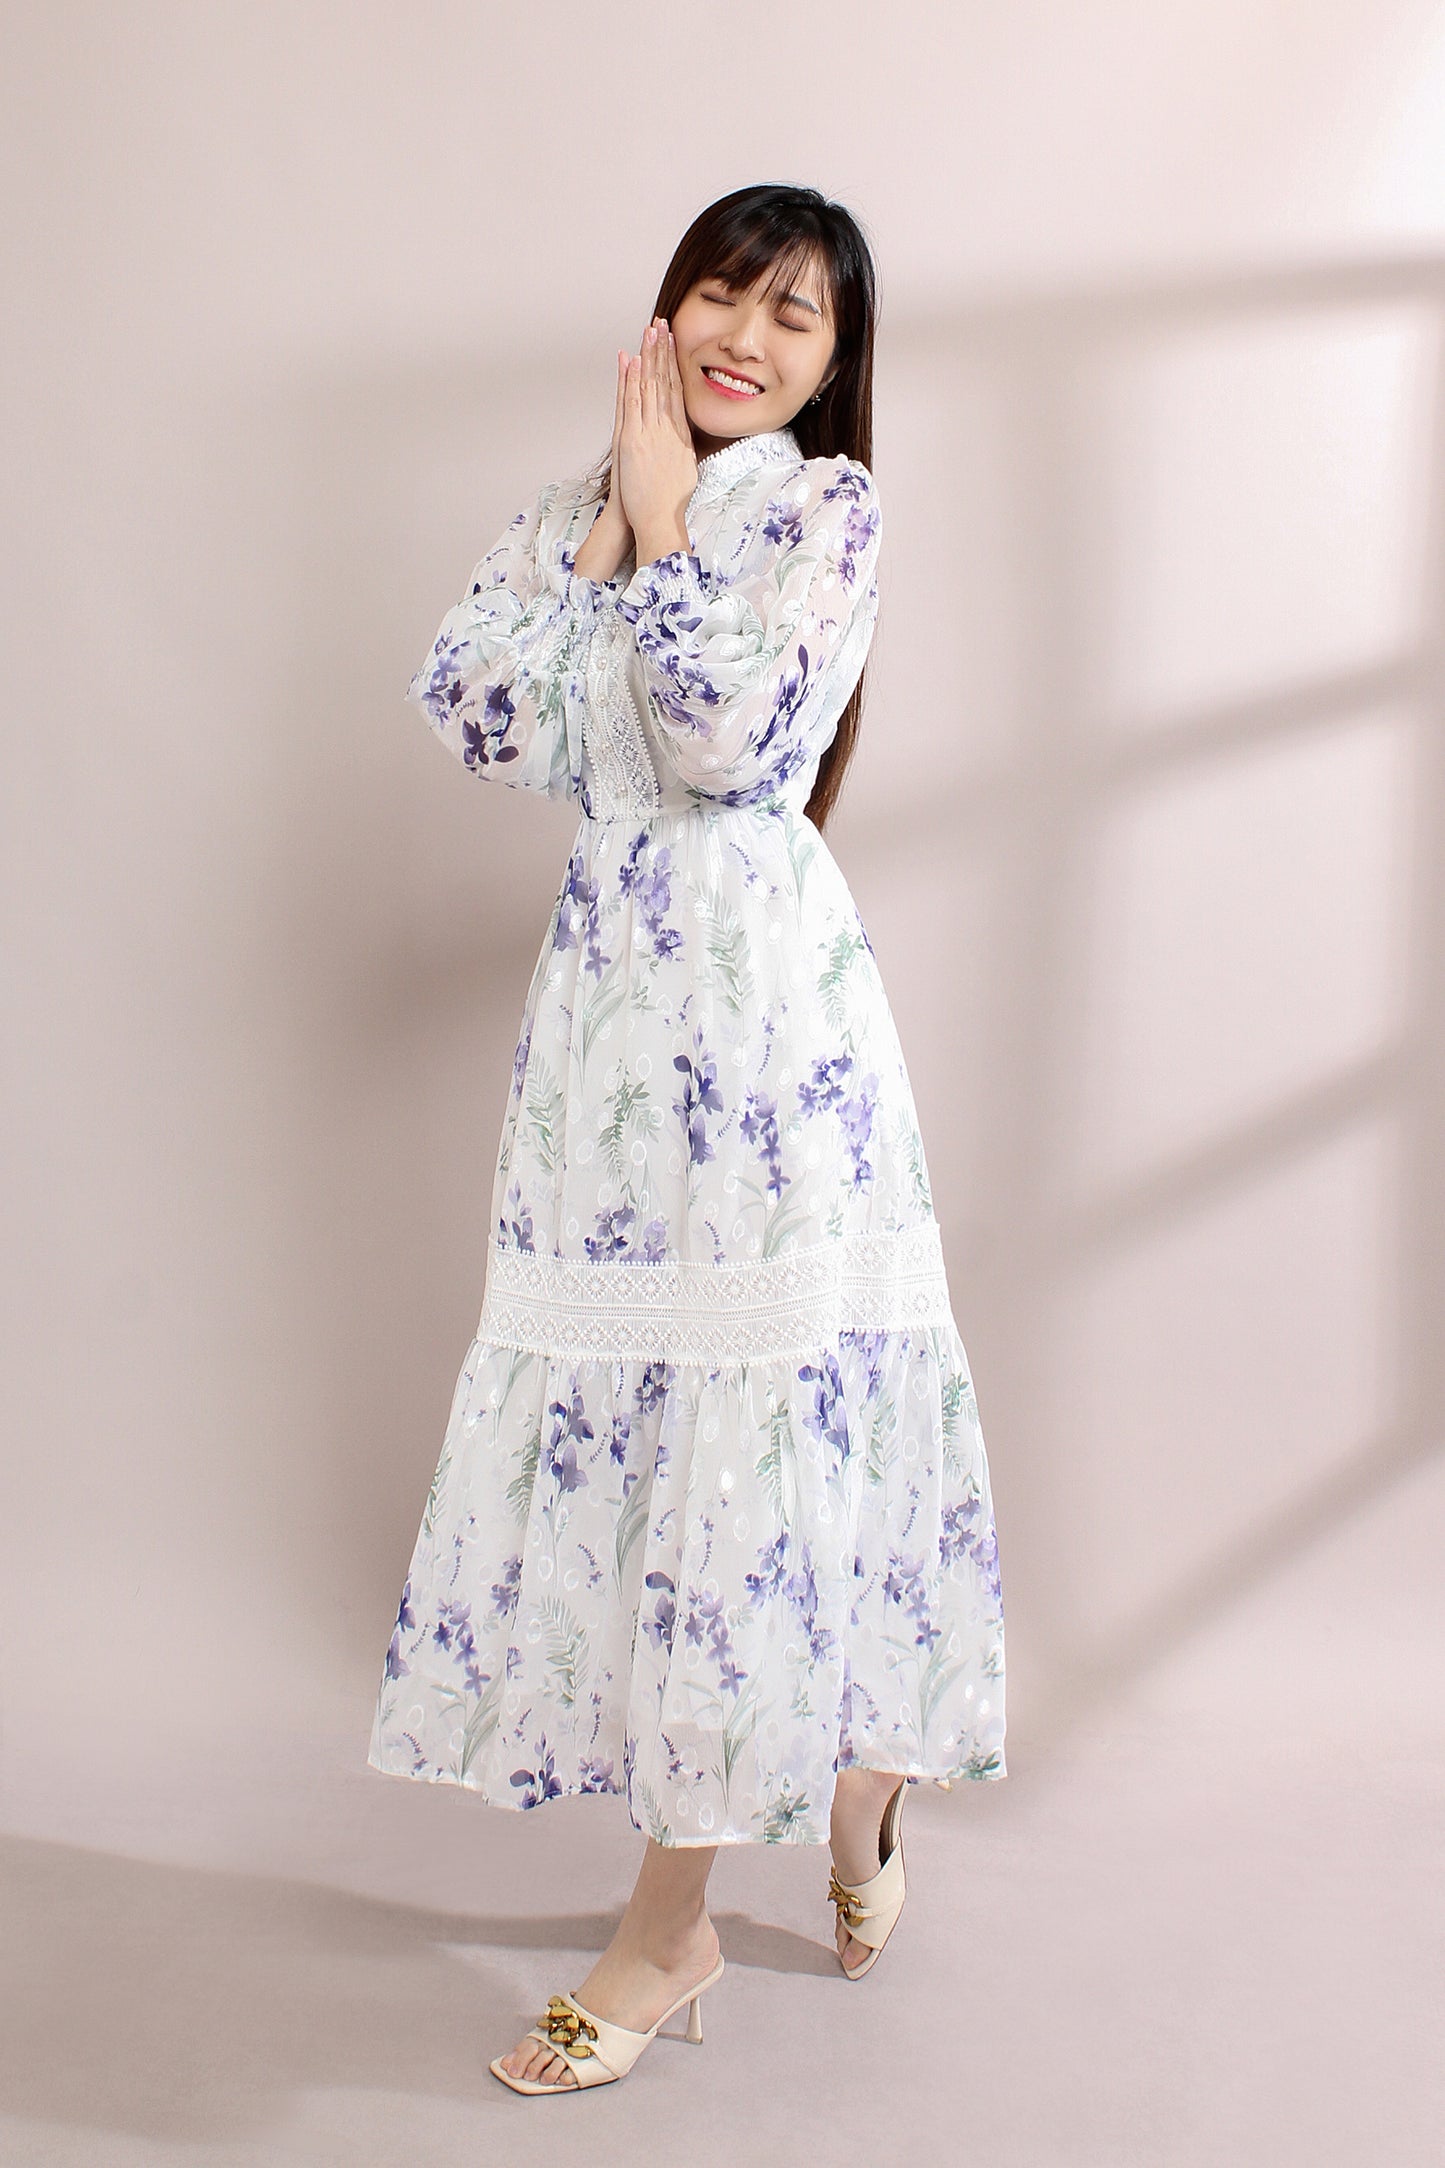 Aphaea Blooming Lace Dress